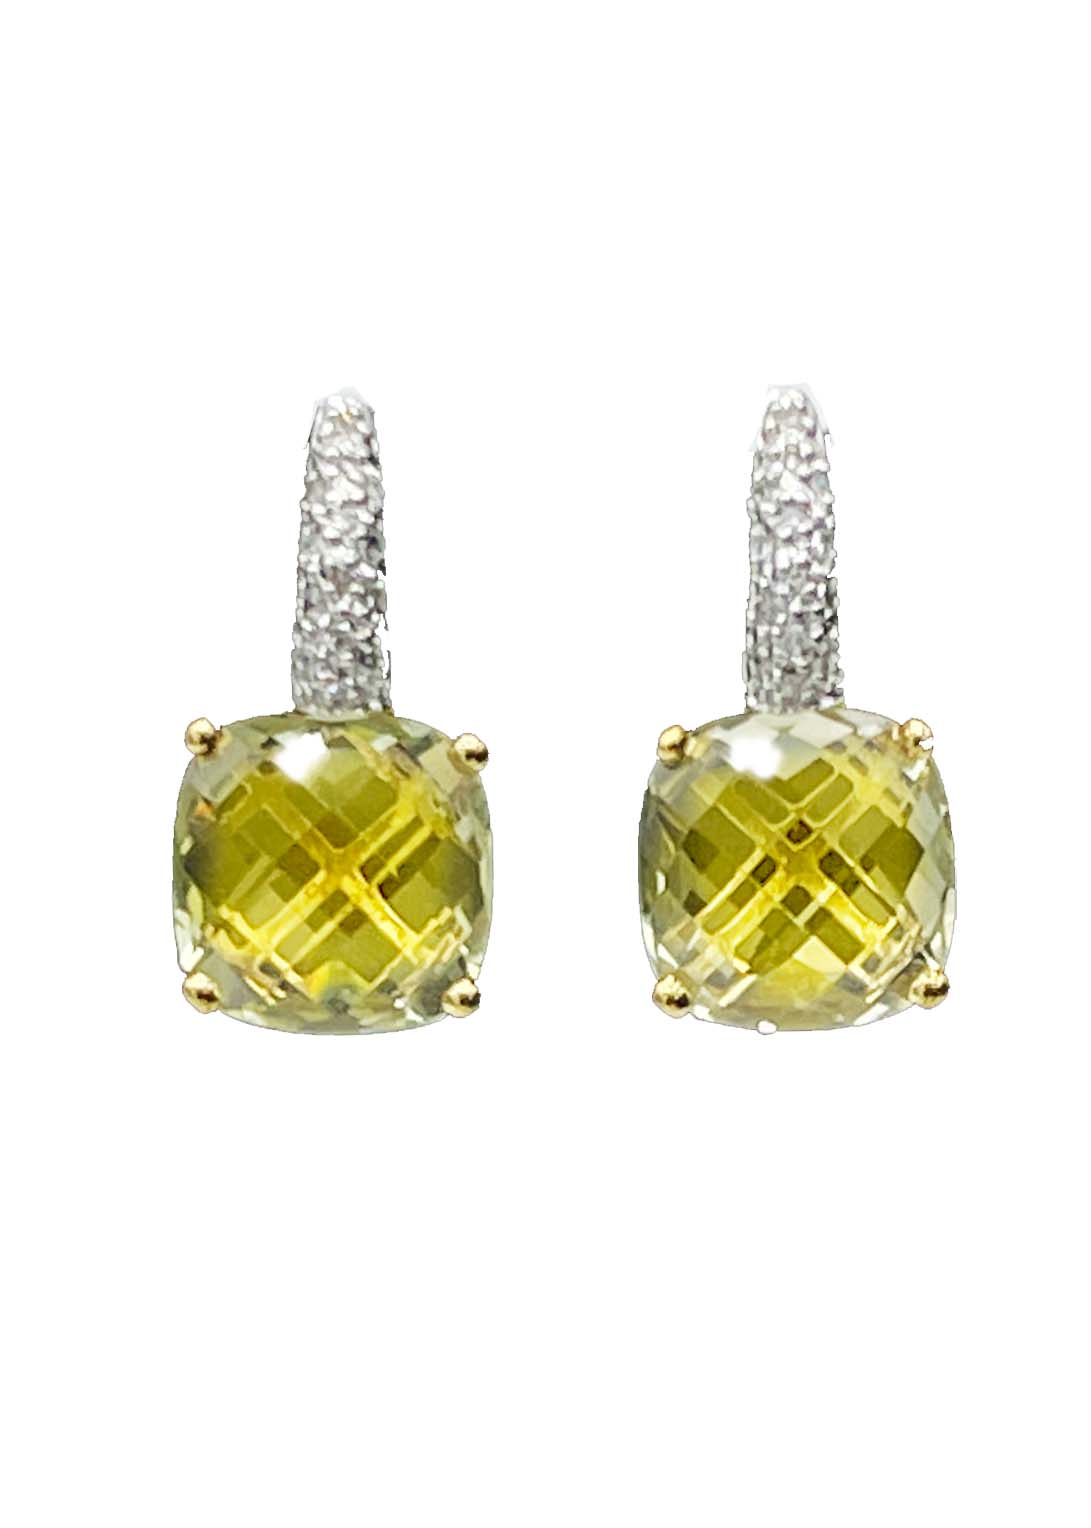 18k White and Yellow Gold Citrine Earrings Image